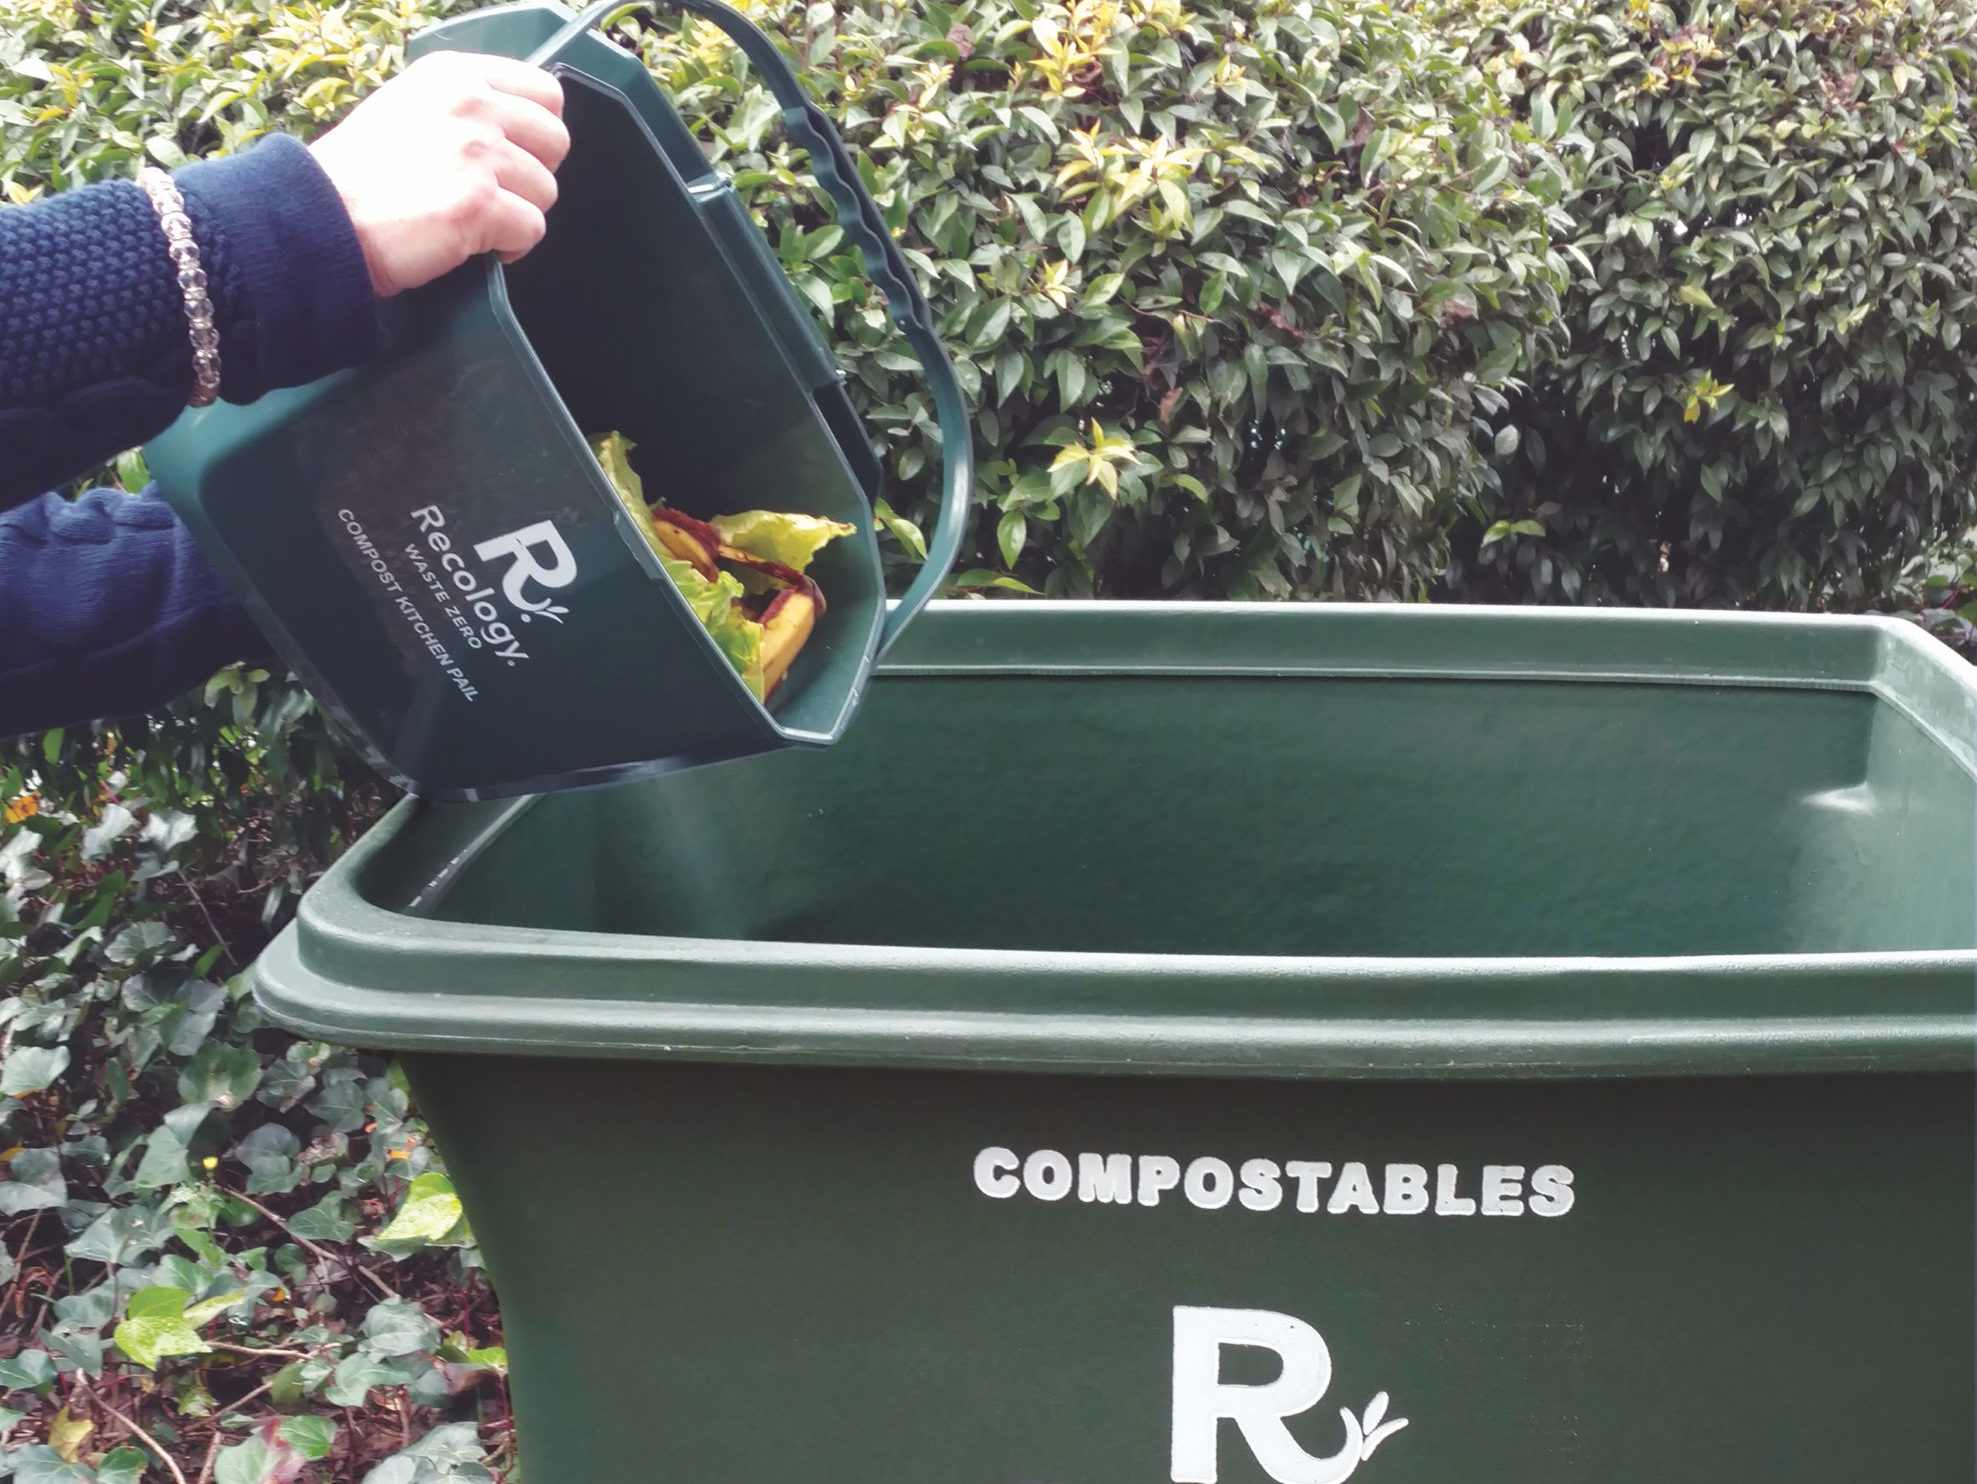 https://www.recology.com/wp-content/uploads/2022/01/Dumping-Compost-scaled-e1643239182950.jpg